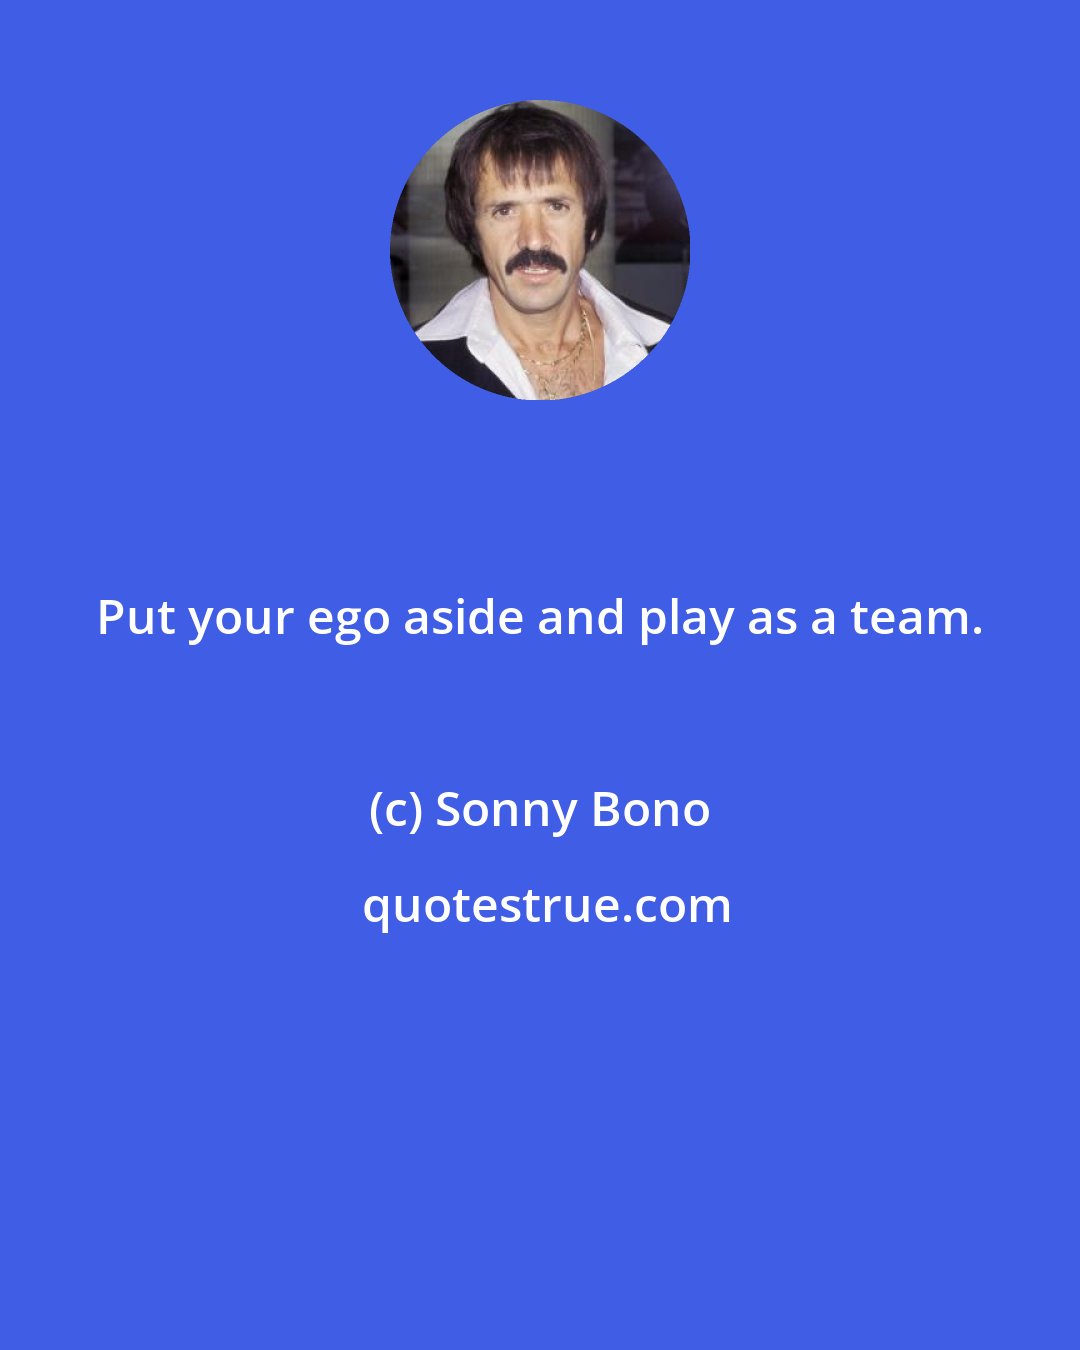 Sonny Bono: Put your ego aside and play as a team.